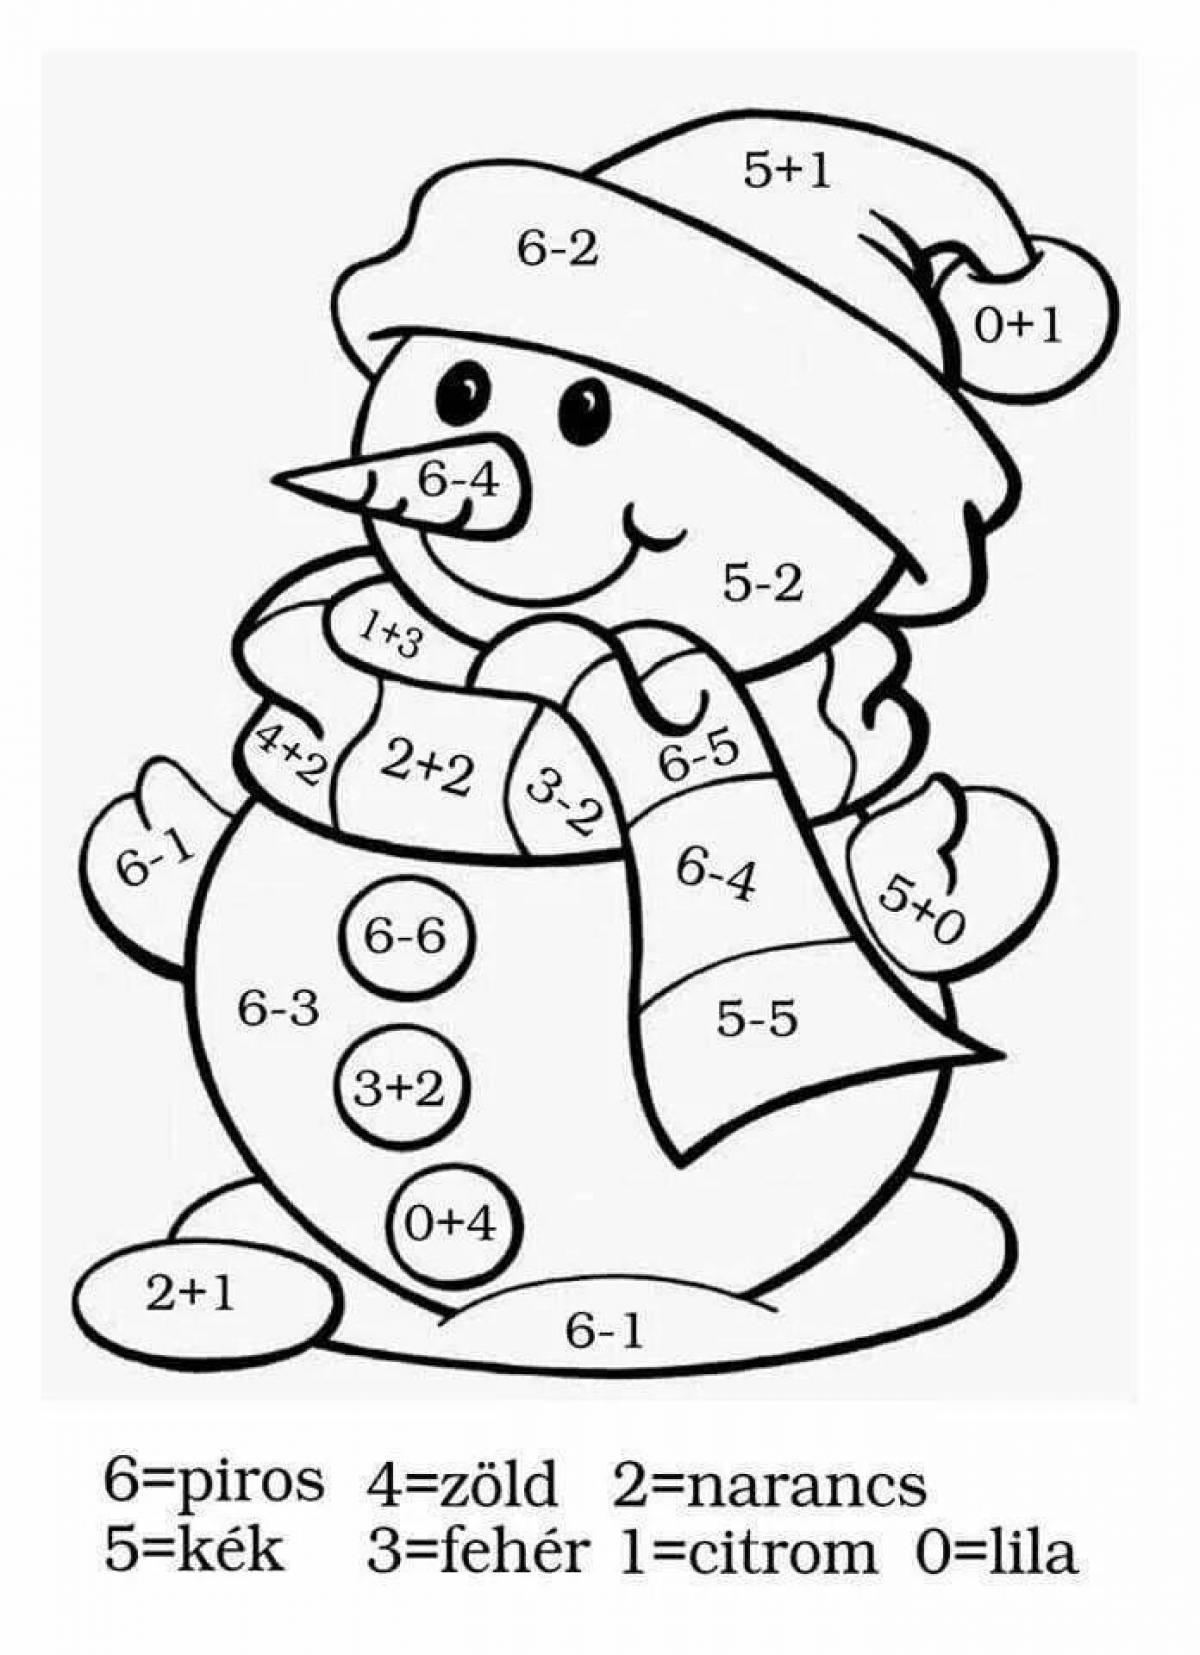 Glowing snowman coloring by numbers